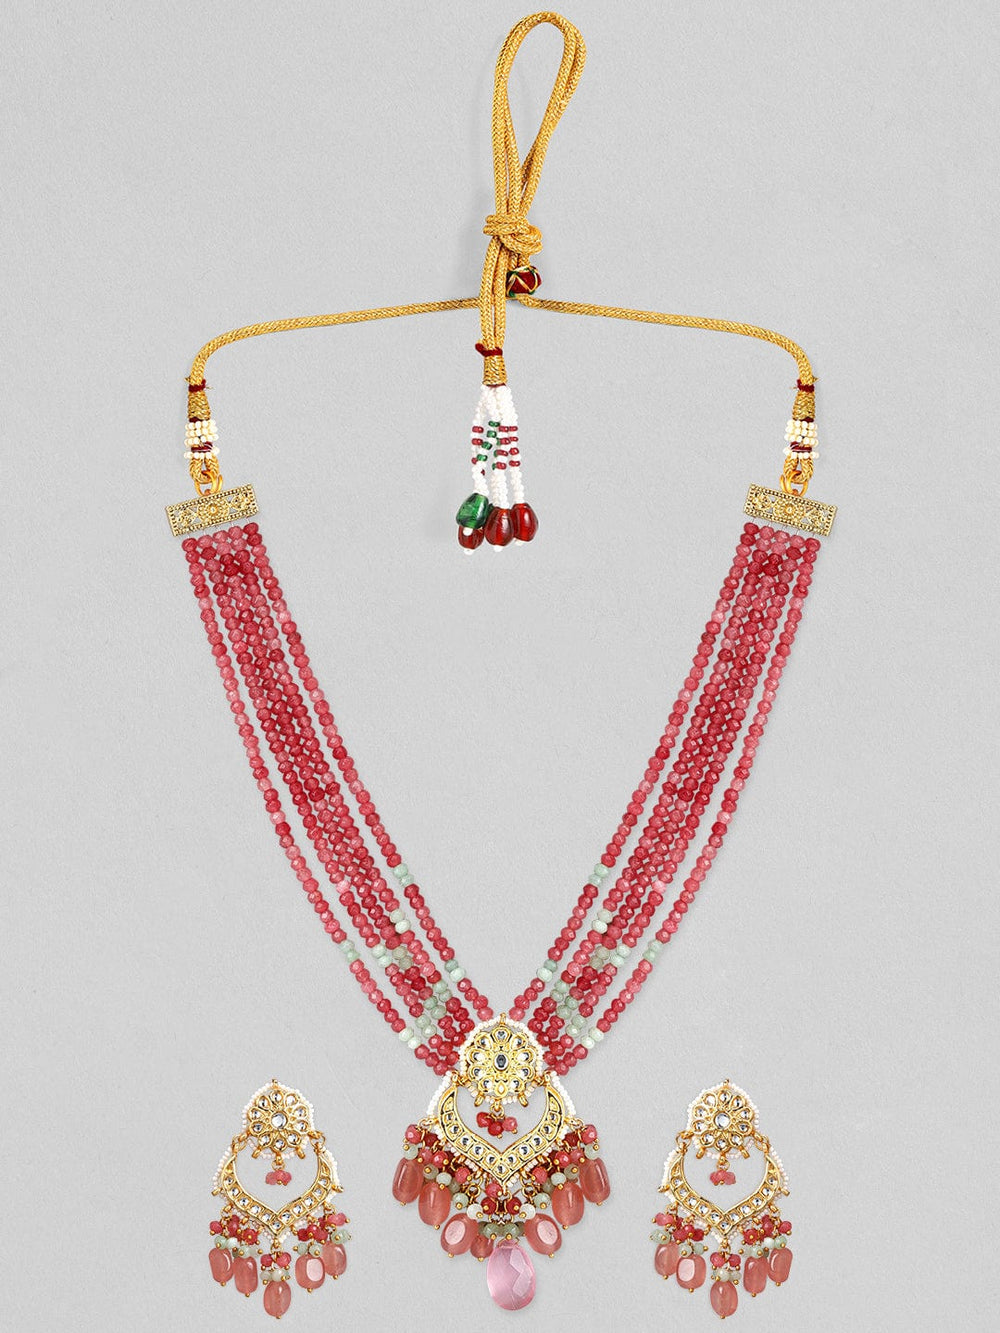 Rubans Luxury Coral red colored Kundan Necklace. Necklace Set